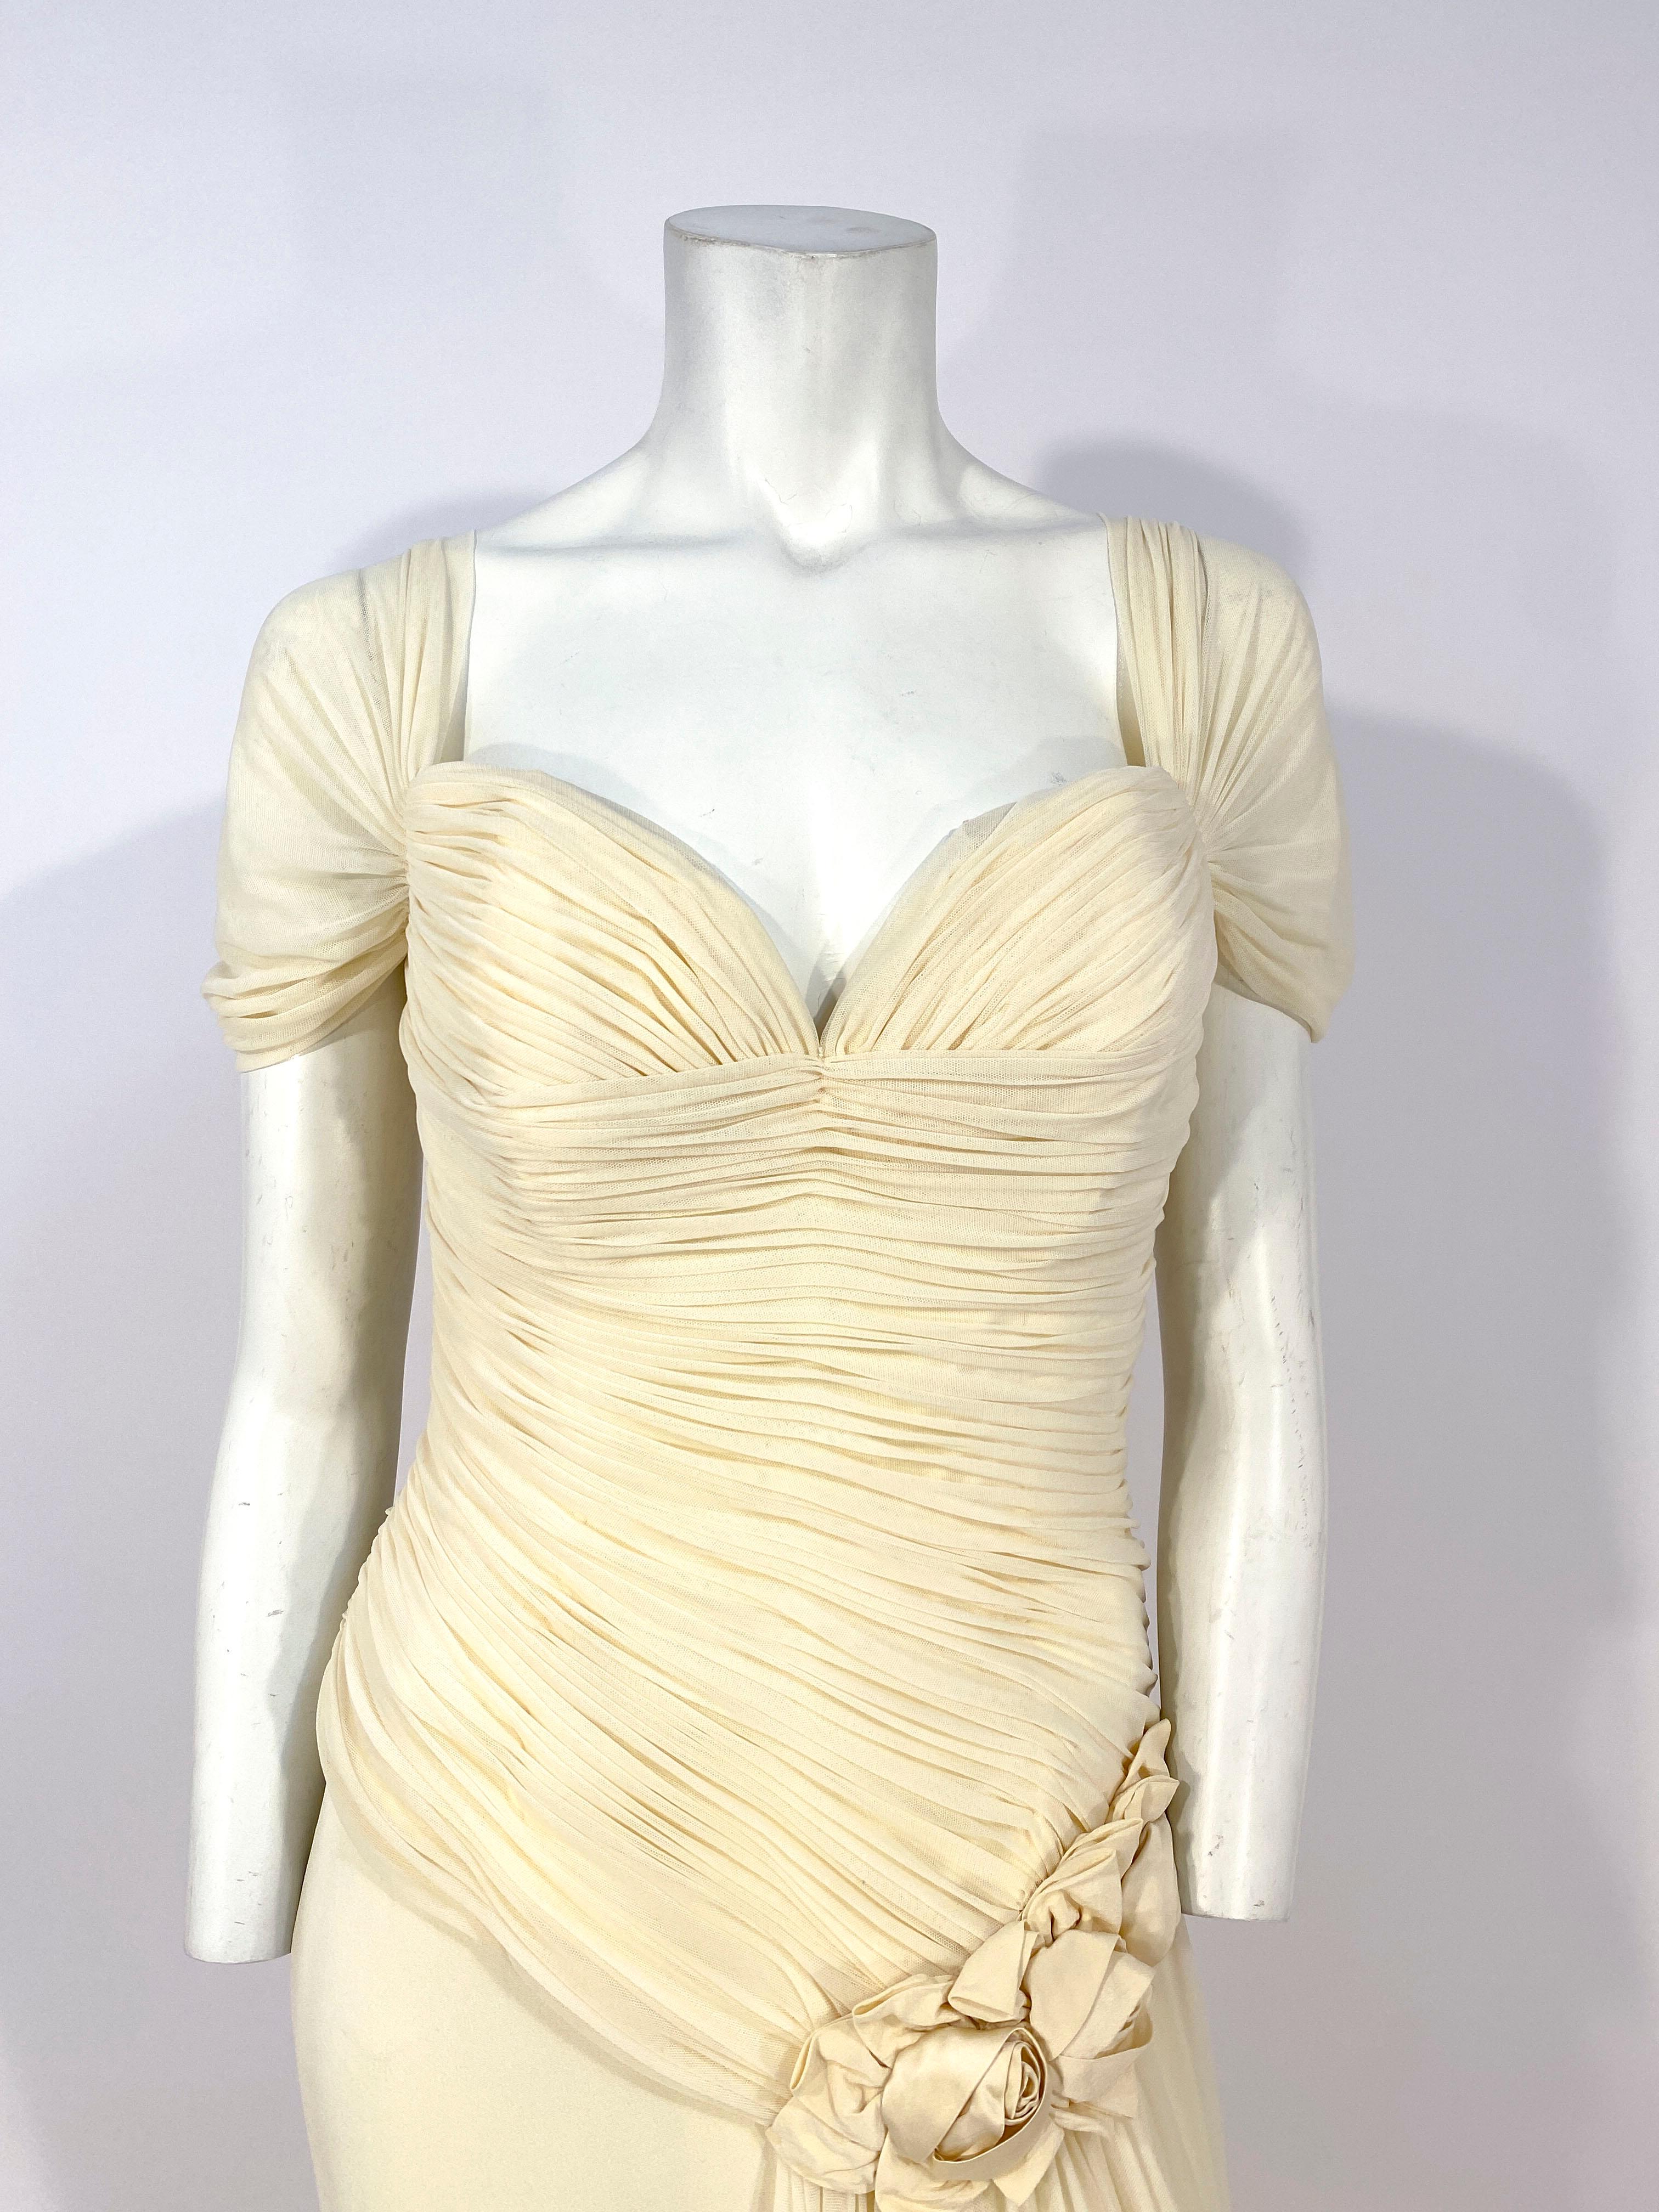 1990s ivory-colored full length evening gown made of silk tulle ruched along the entire bodice. The off-the-shoulder are drapes are attached to the bodice and the skirt has a large and high leg slit covered with a gathered flounce finished at the